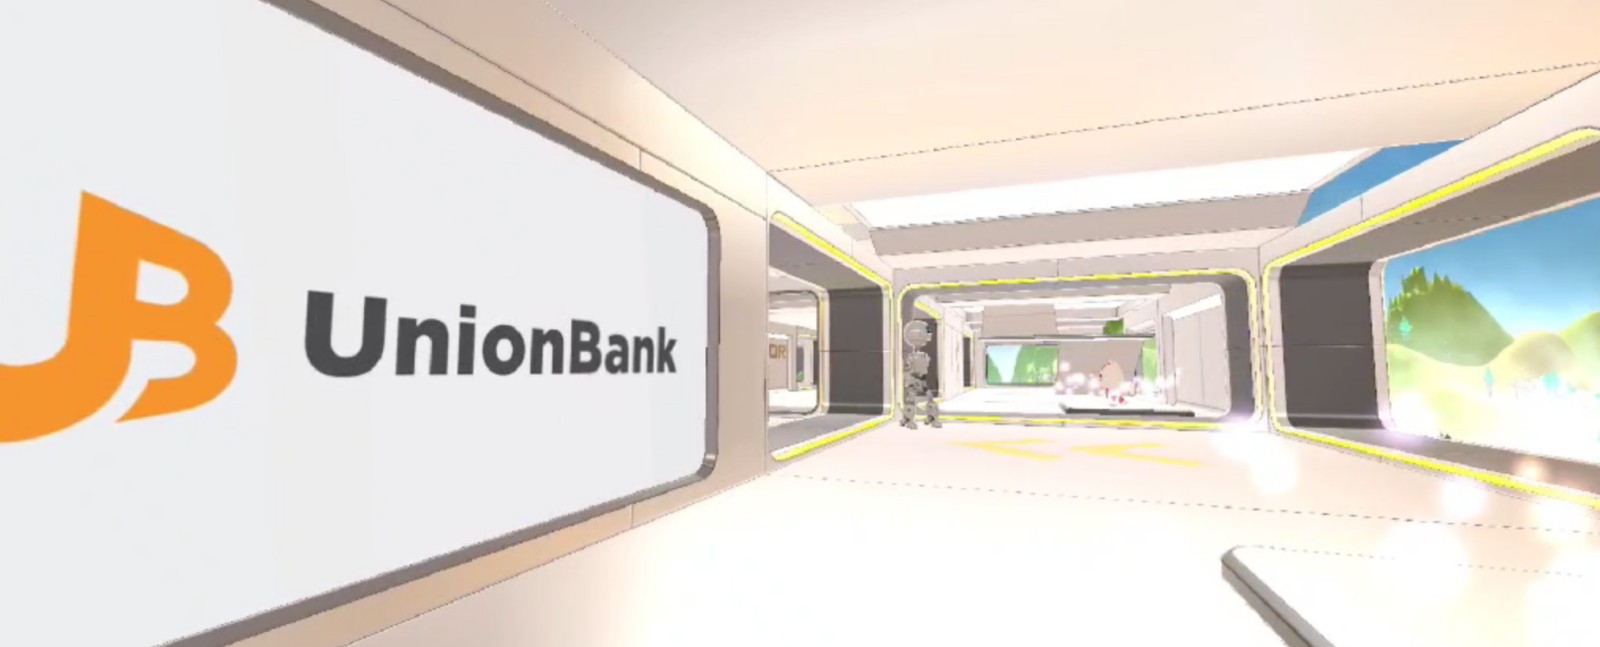 Union Bank of the Philippines Enters the Metaverse with the Ark of Dreams